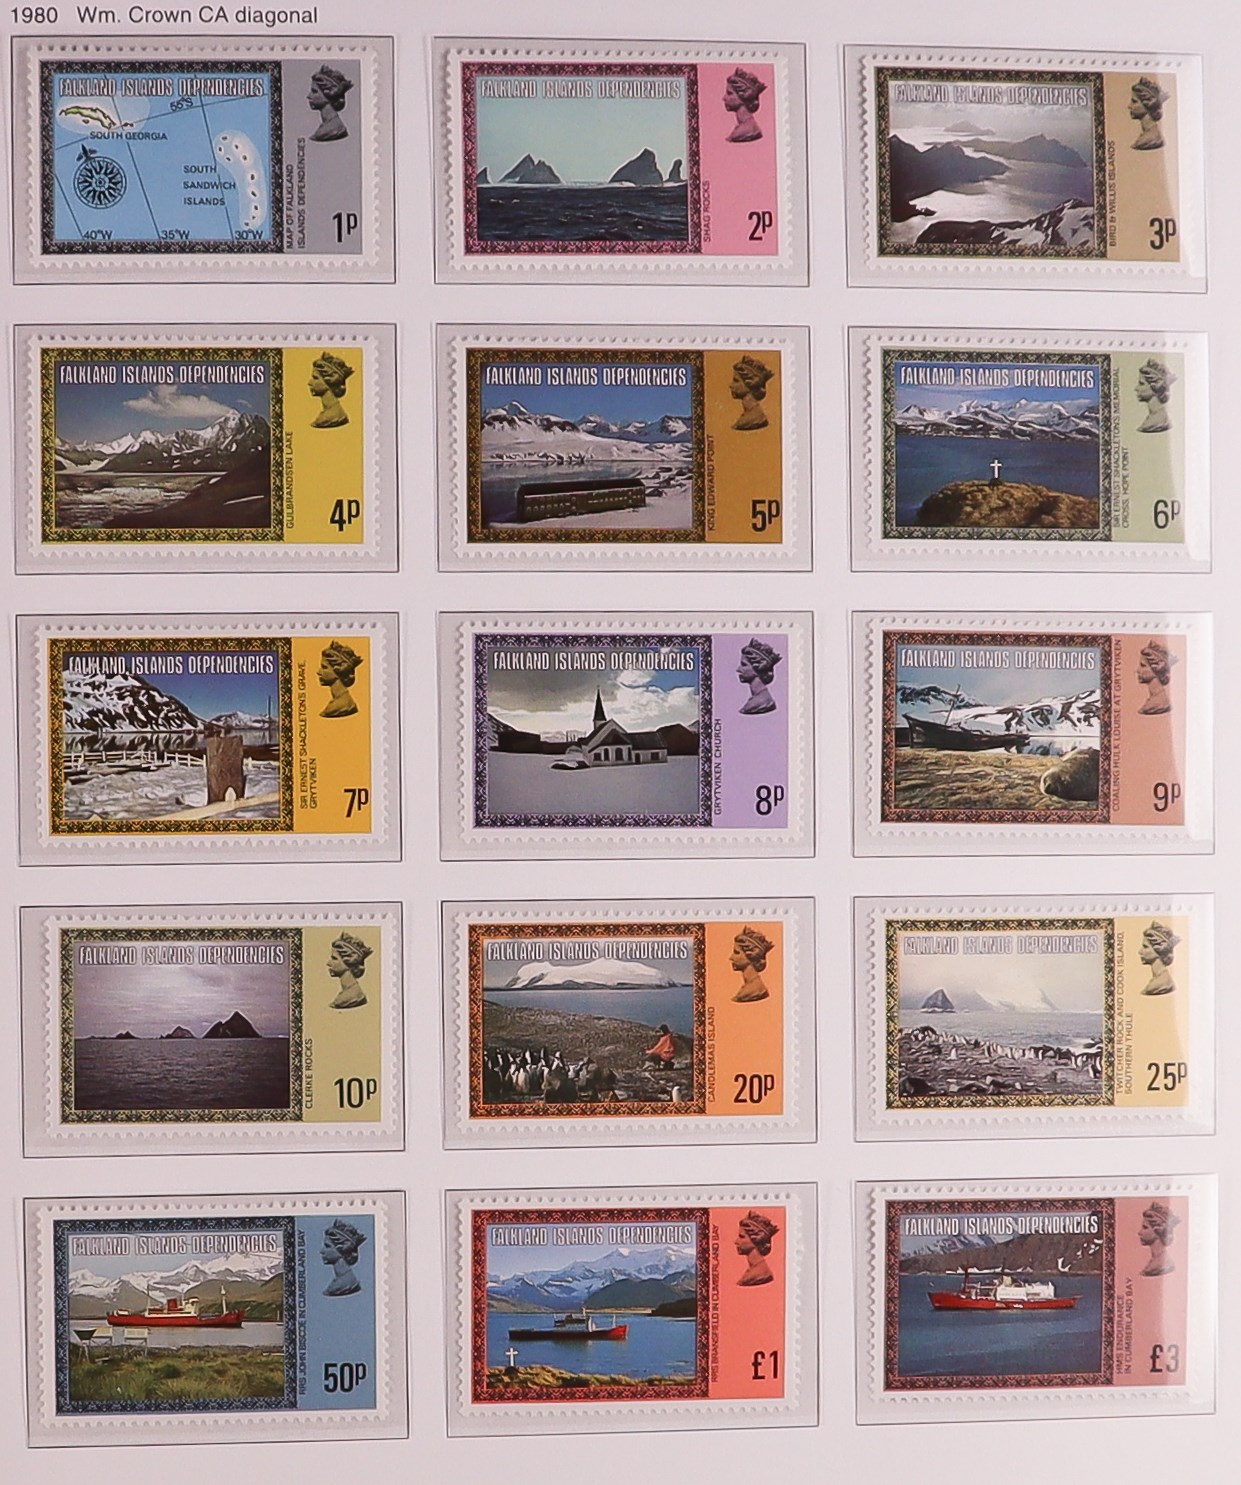 FALKLAND IS. DEPS. 1944 - 2009 NEVER HINGED MINT COLLECTION of Dependencies and South Georgia on - Image 12 of 16